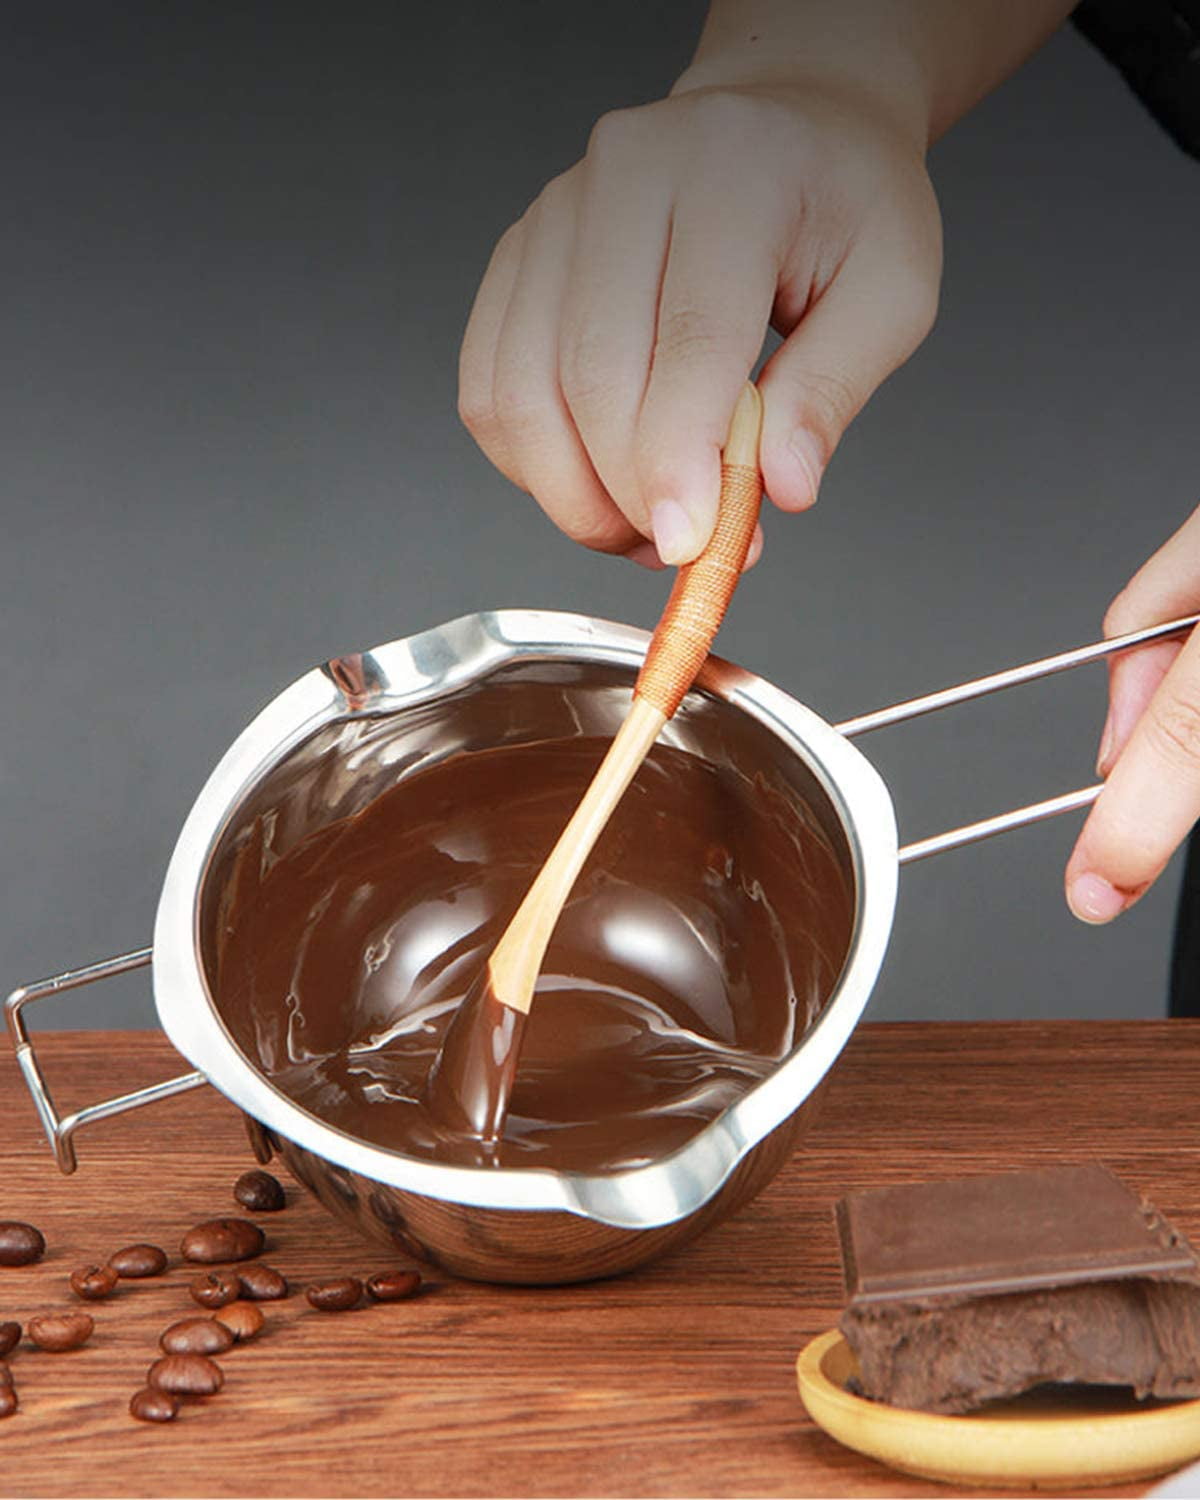 GOCTOS Stainless Steel Double Boiler Pot,Melting Chocolate,Butter